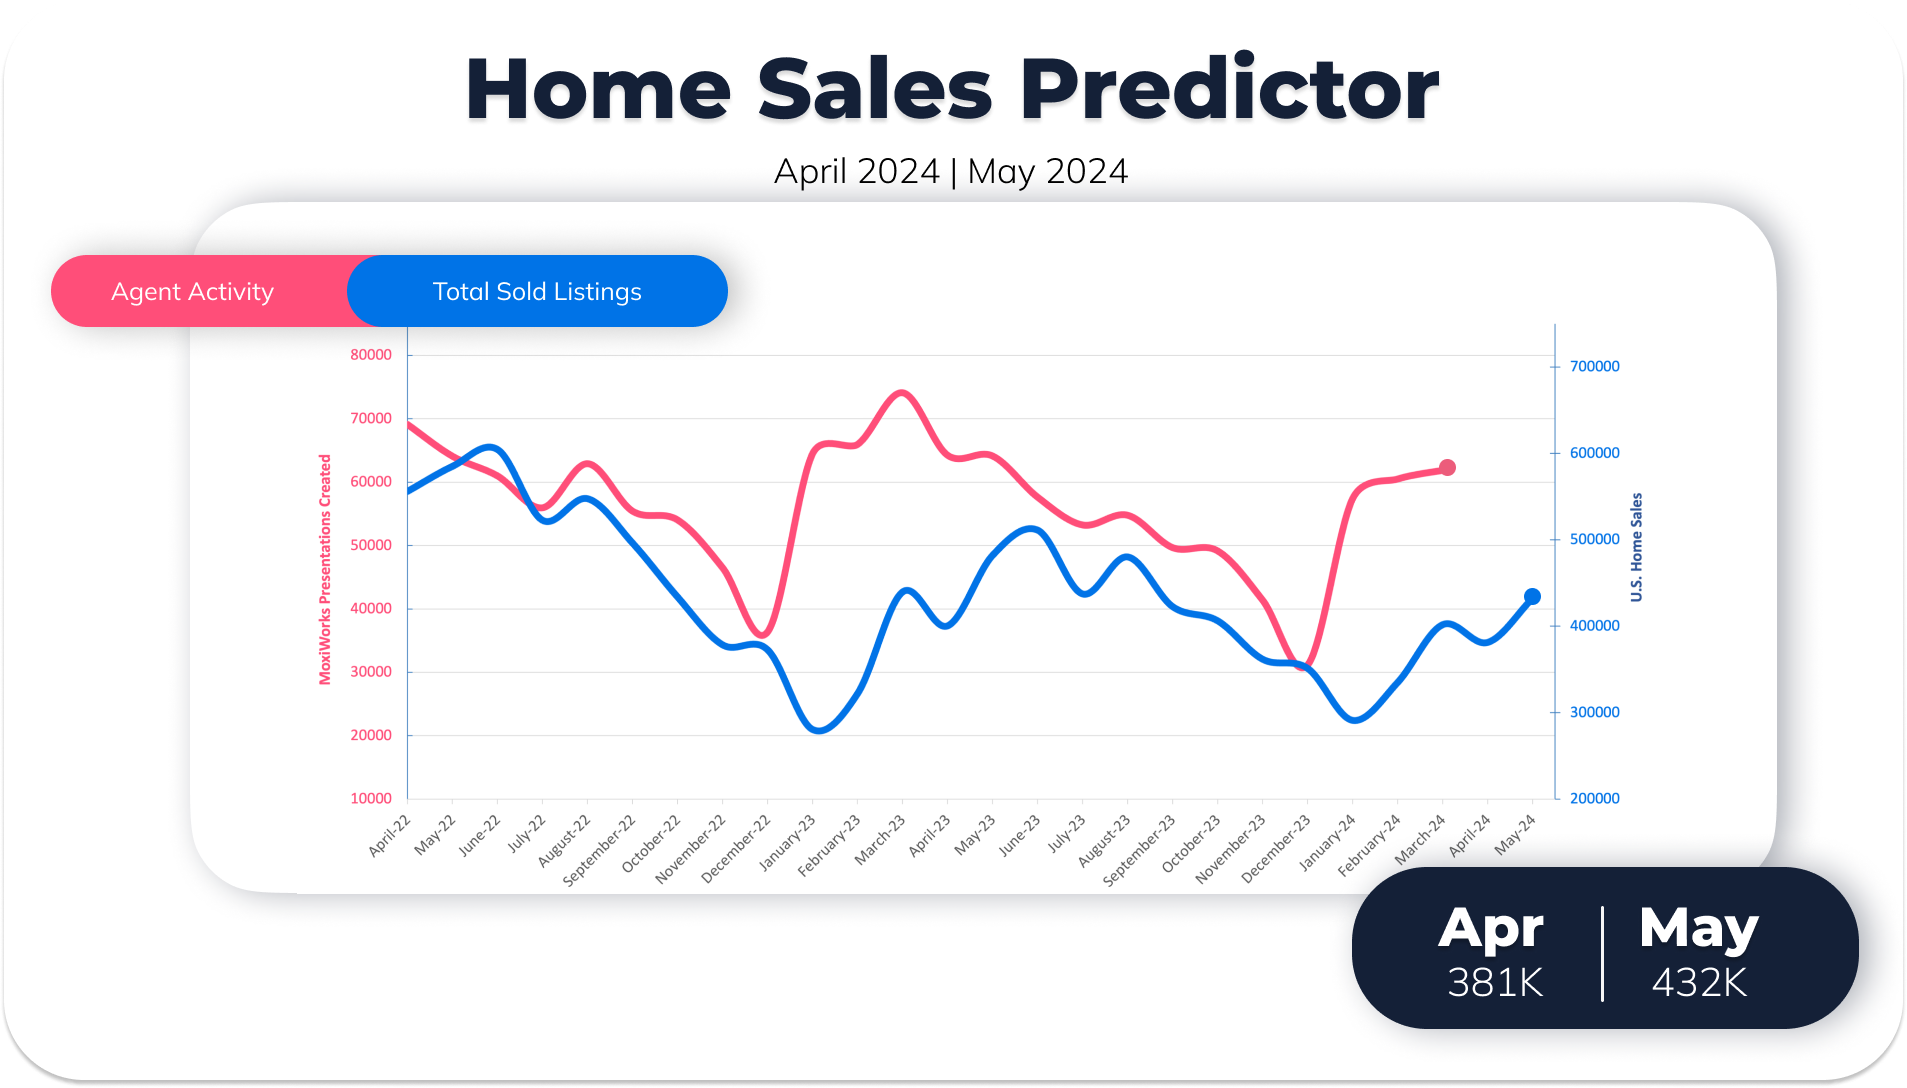 MoxiWorks Home Sales Predictor Graph for Apr 2024